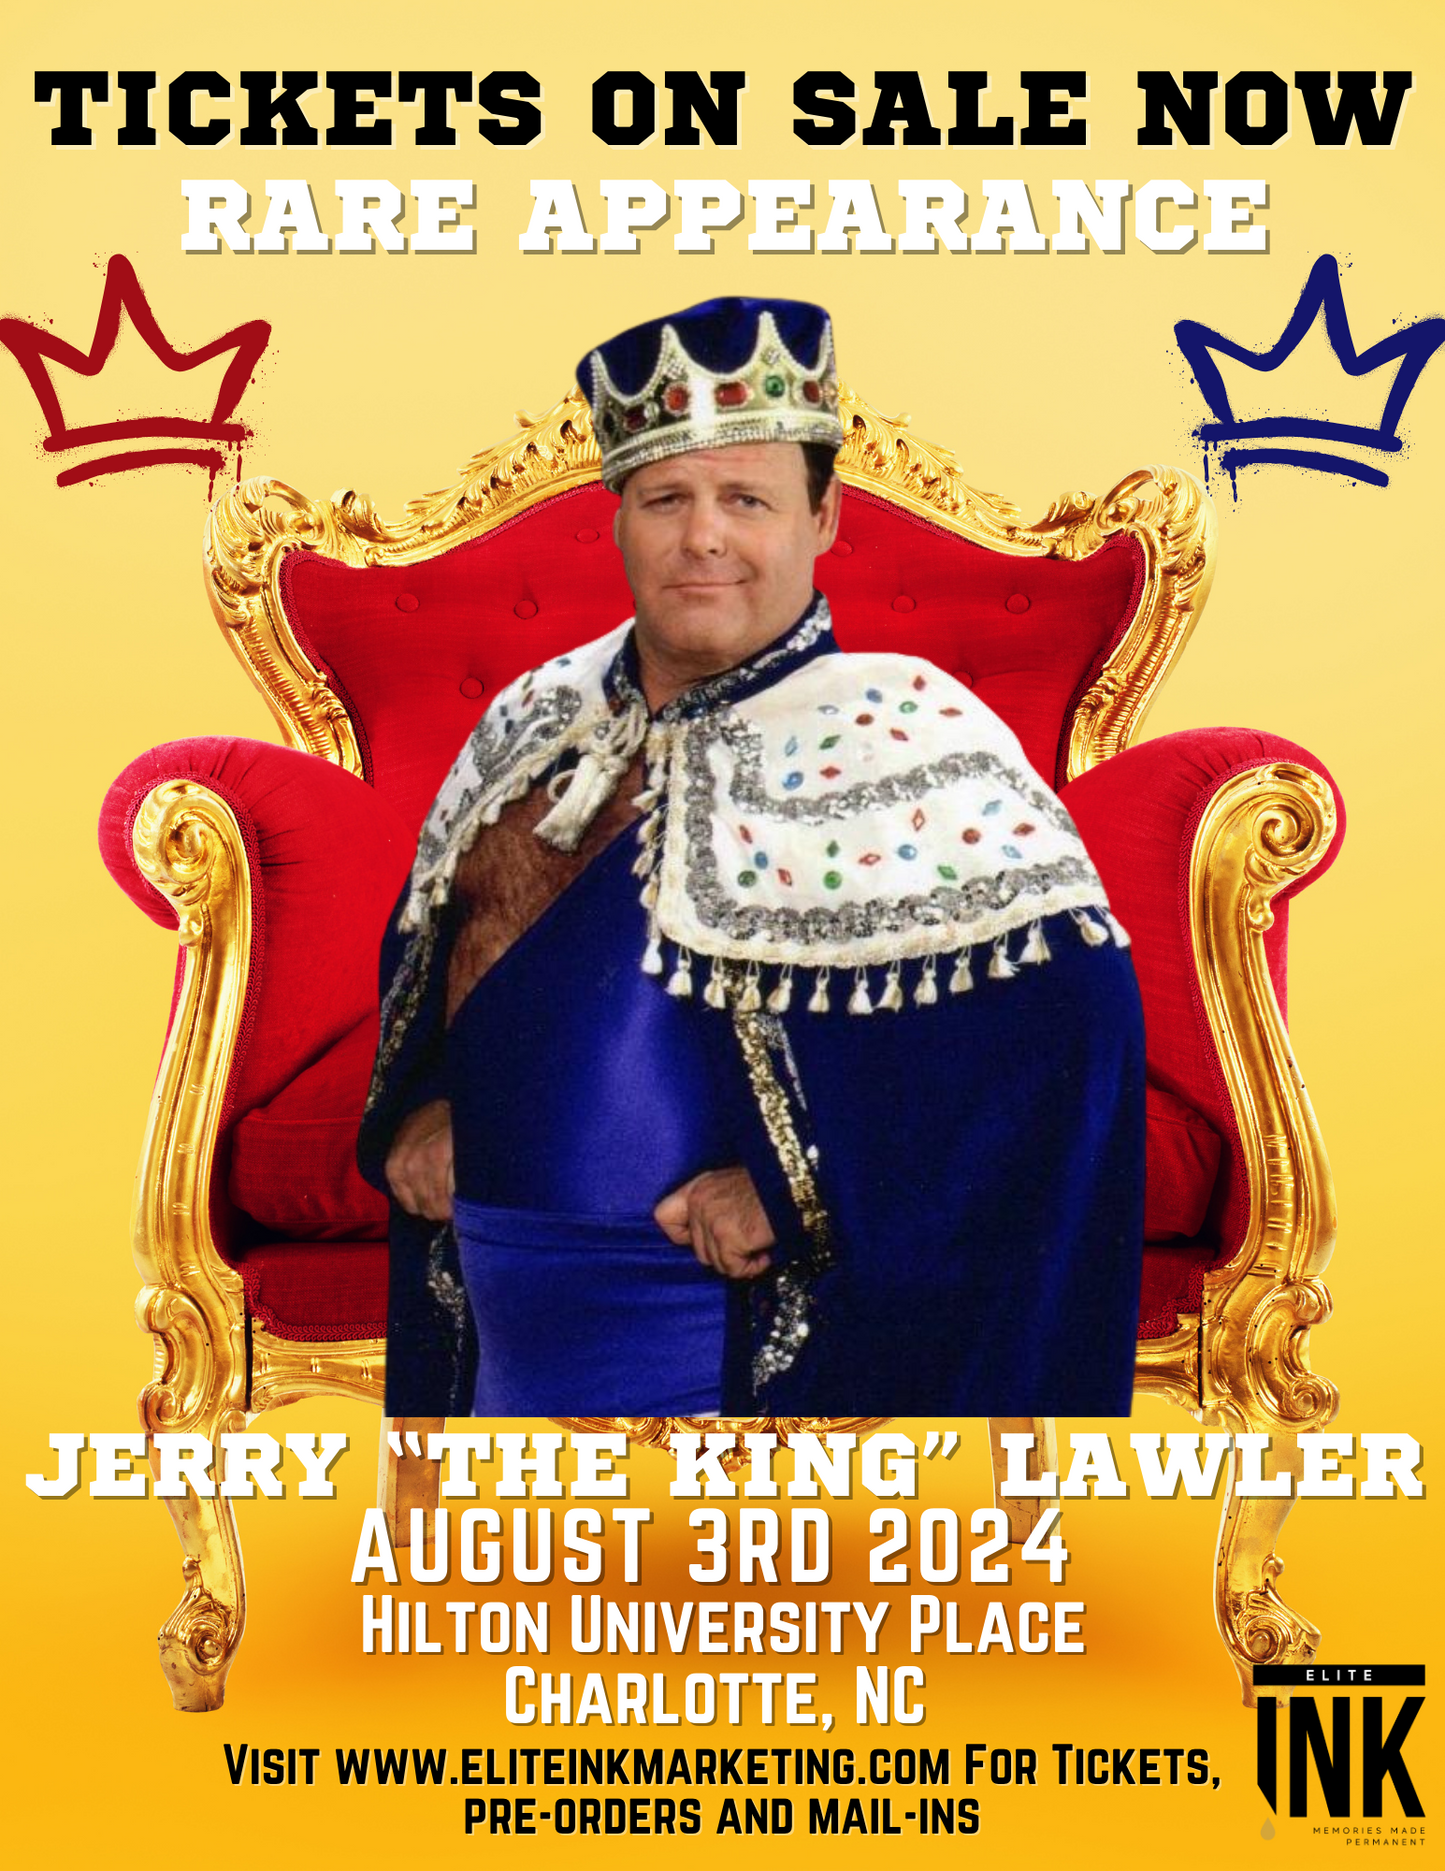 Jerry the King Lawler Autograph Pre-Sale Saturday August 3rd 2024